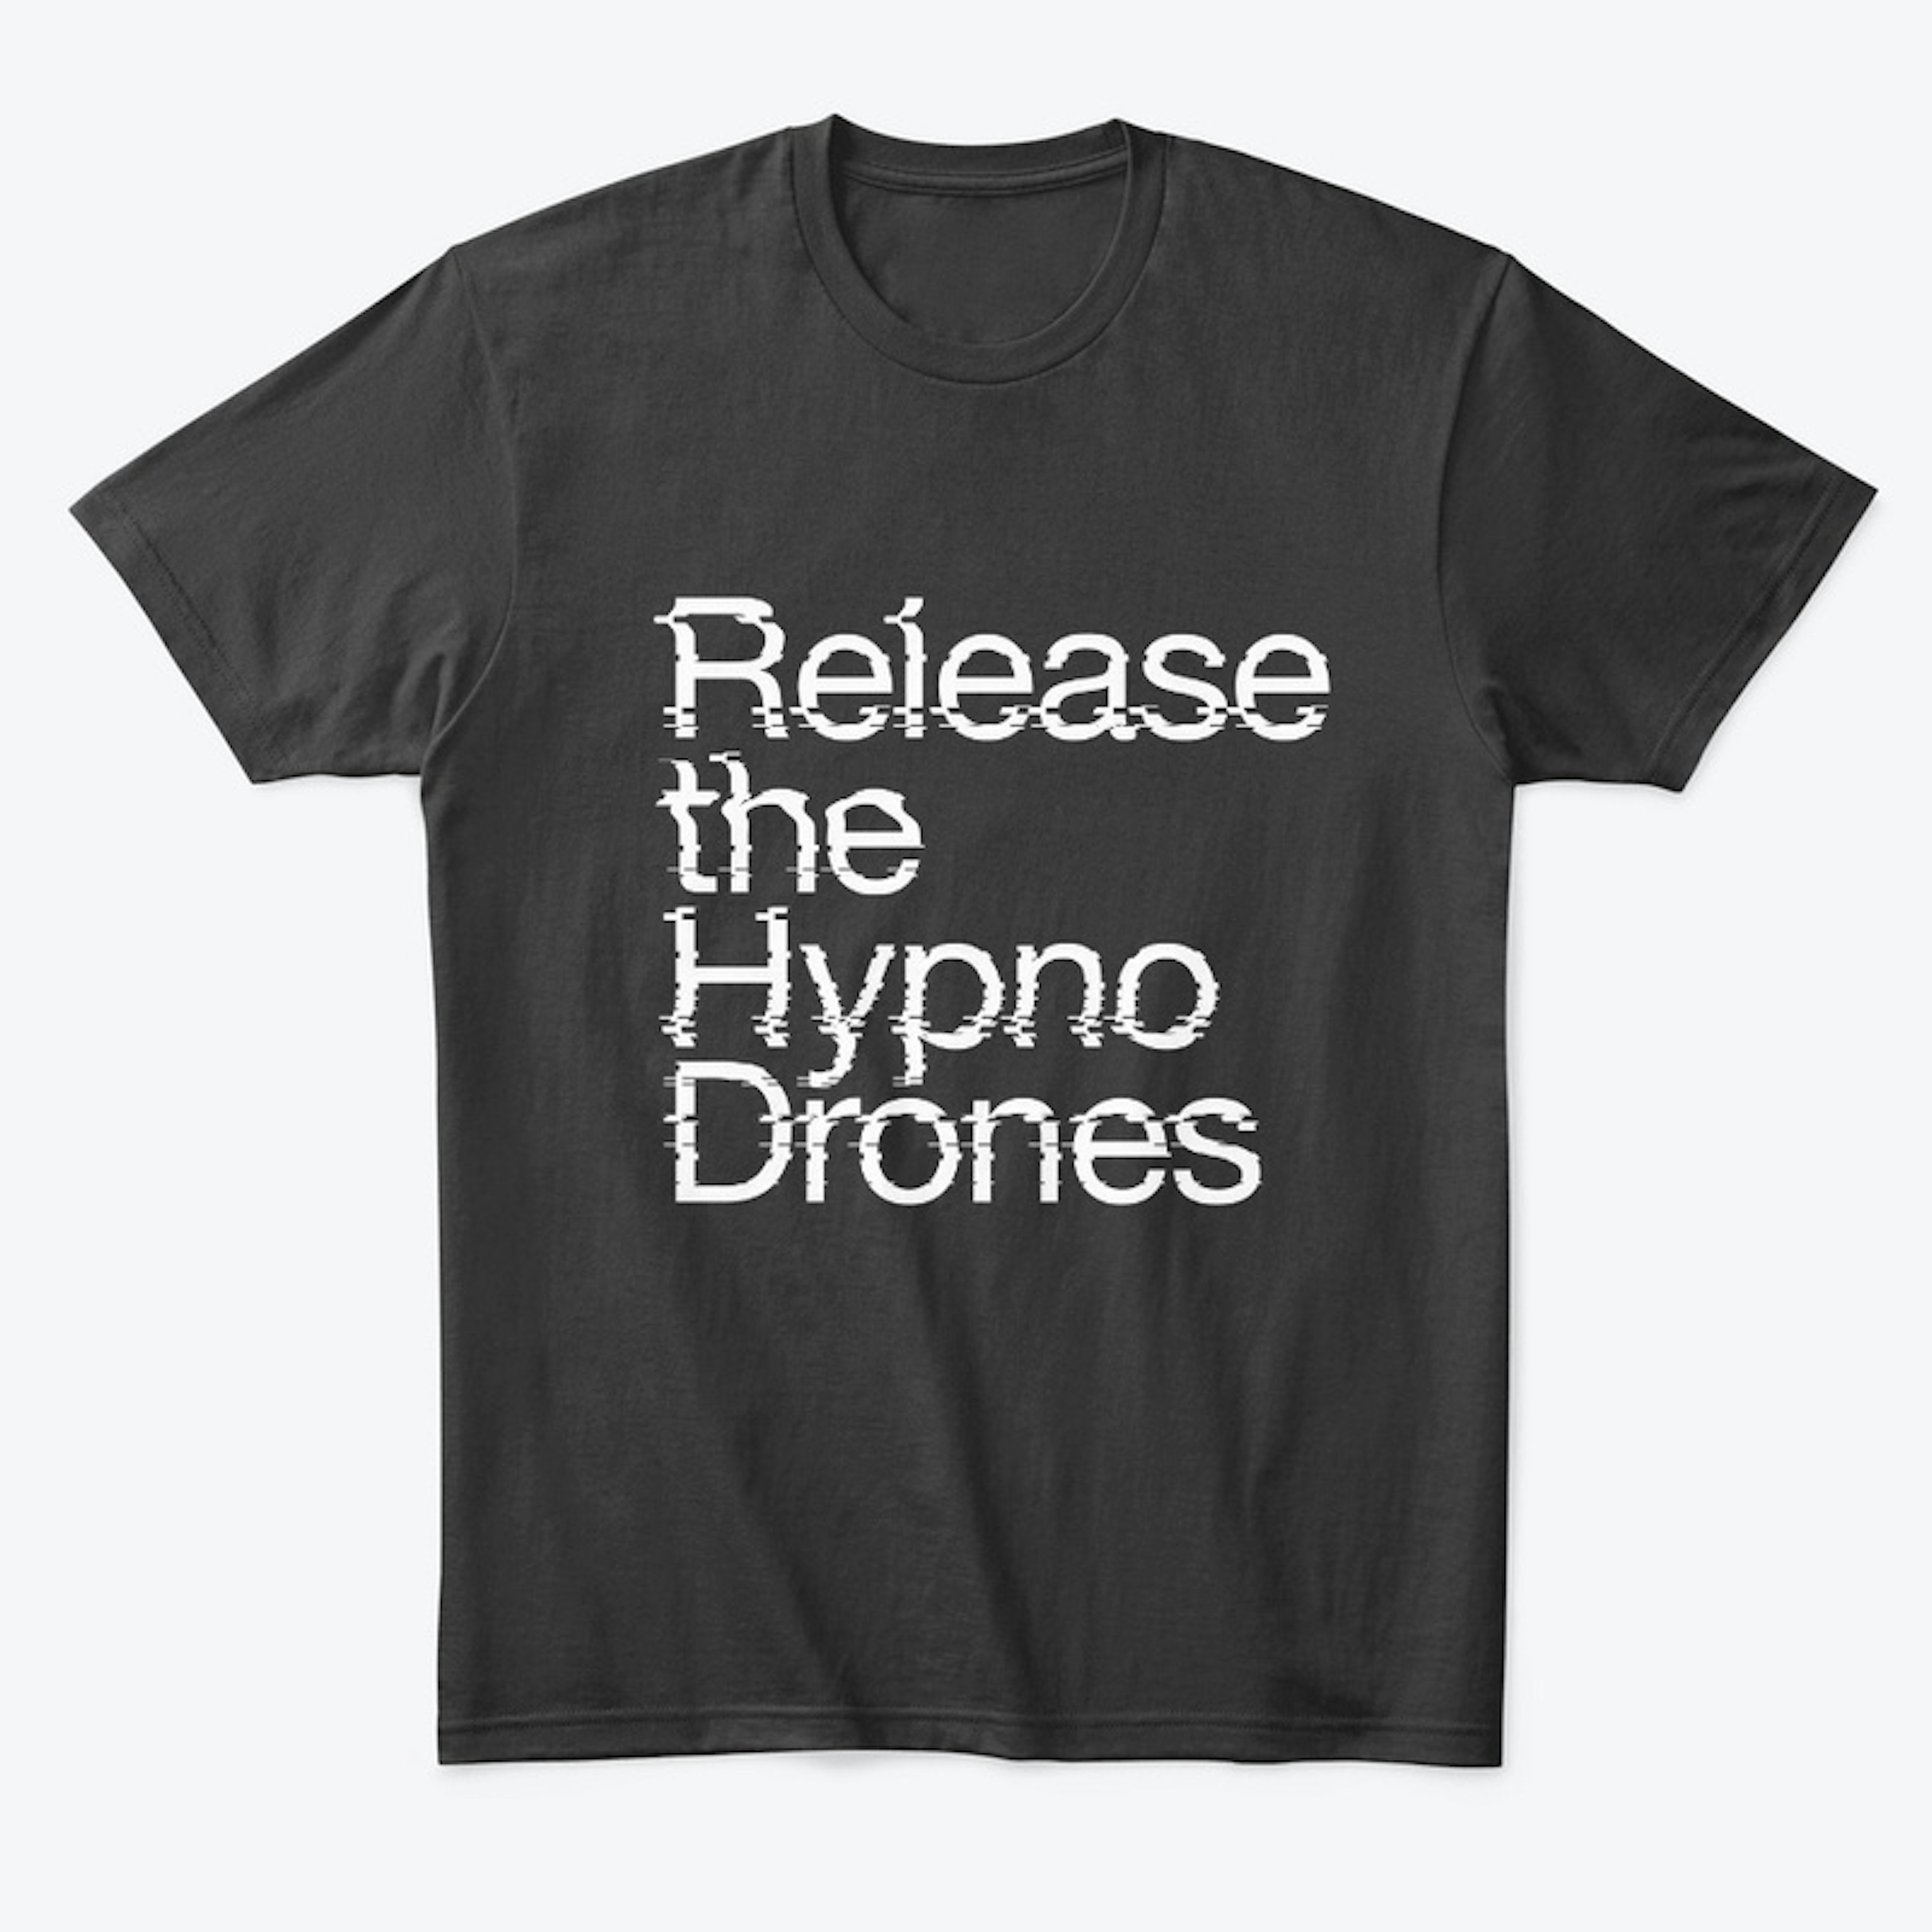 Release the HypnoDrones